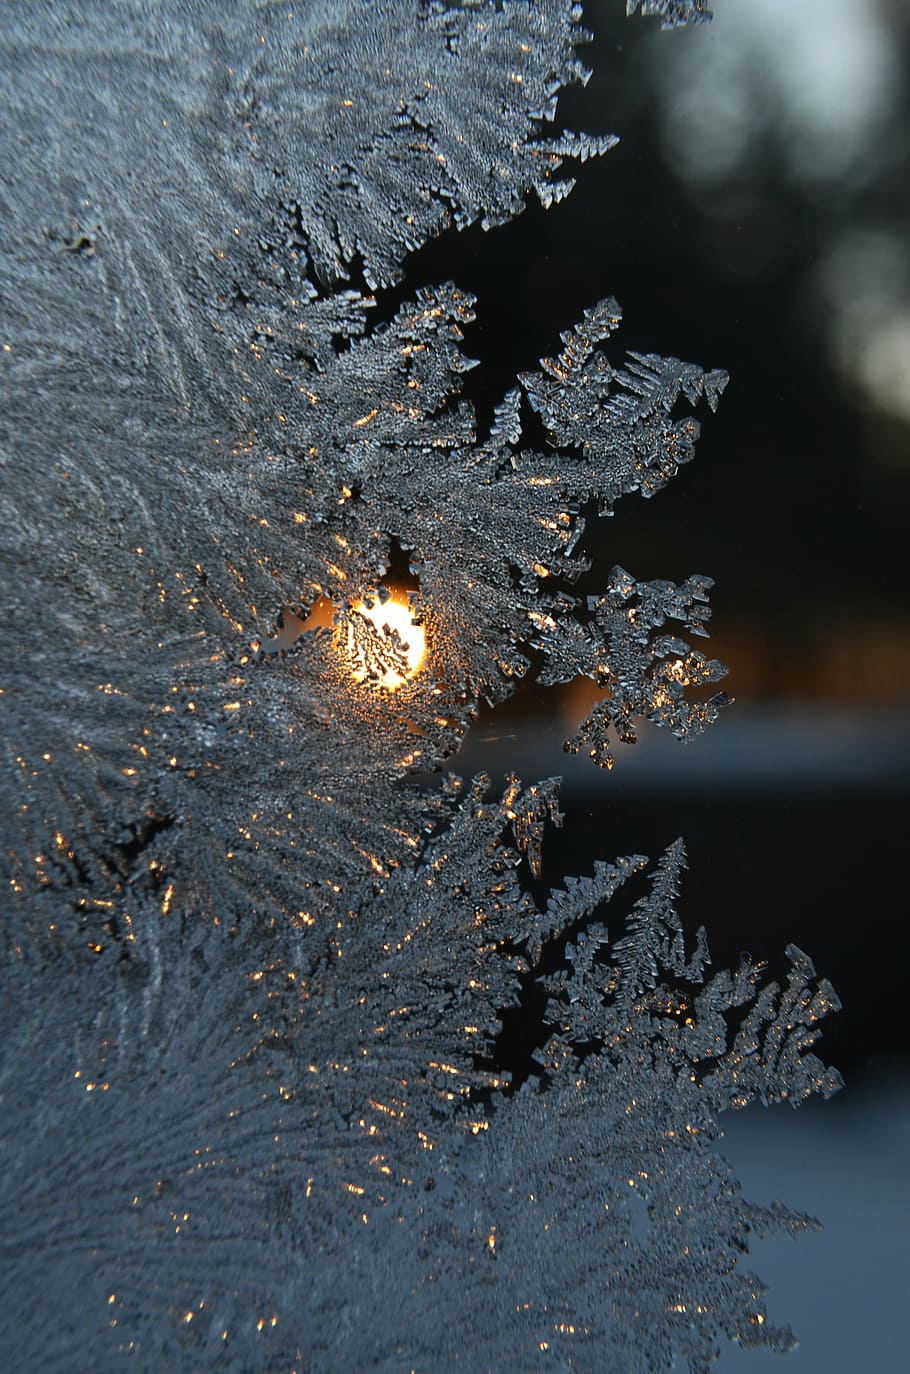 snowflakes close-up photo, frost, window, winter, snow, cold, white, snowy, ice, landscapes